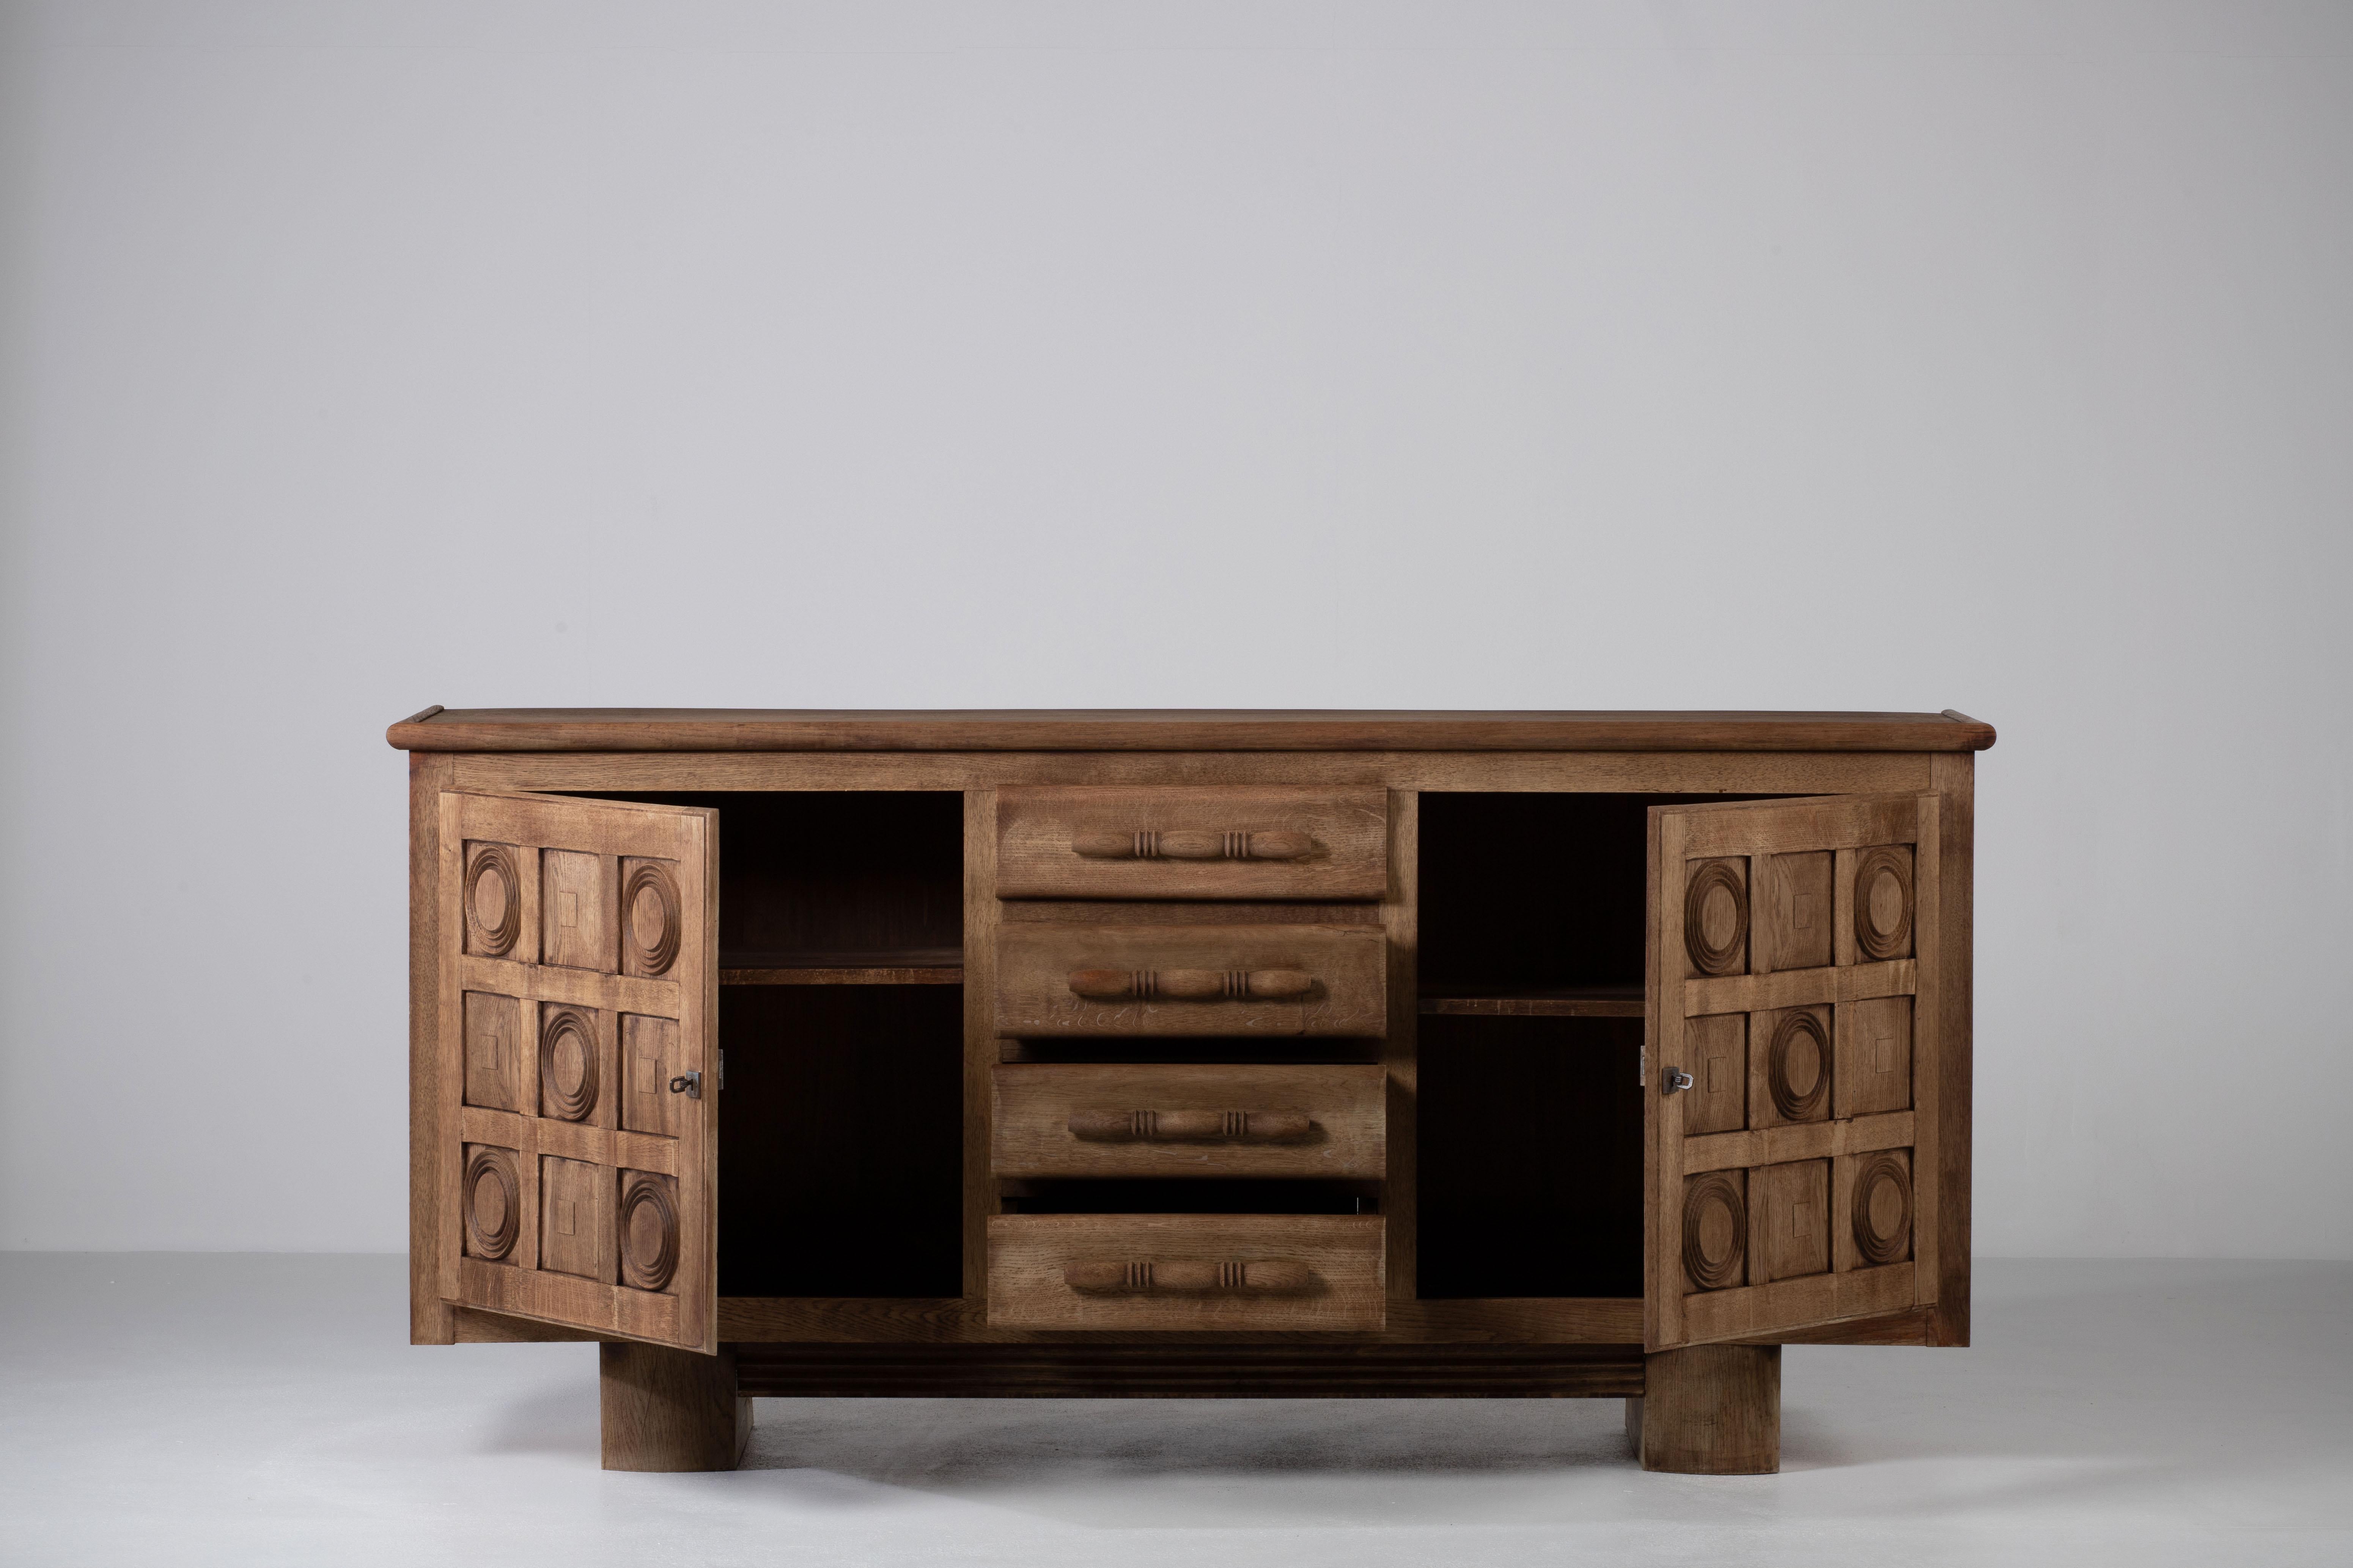 Credenza, solid oak, France, 1940s, after Charles Dudouyt.
Large Art Deco Brutalist sideboard. 
The credenza consists of three central drawers and two storage facilities and covered with very detailed designed doors. 
The refined wooden